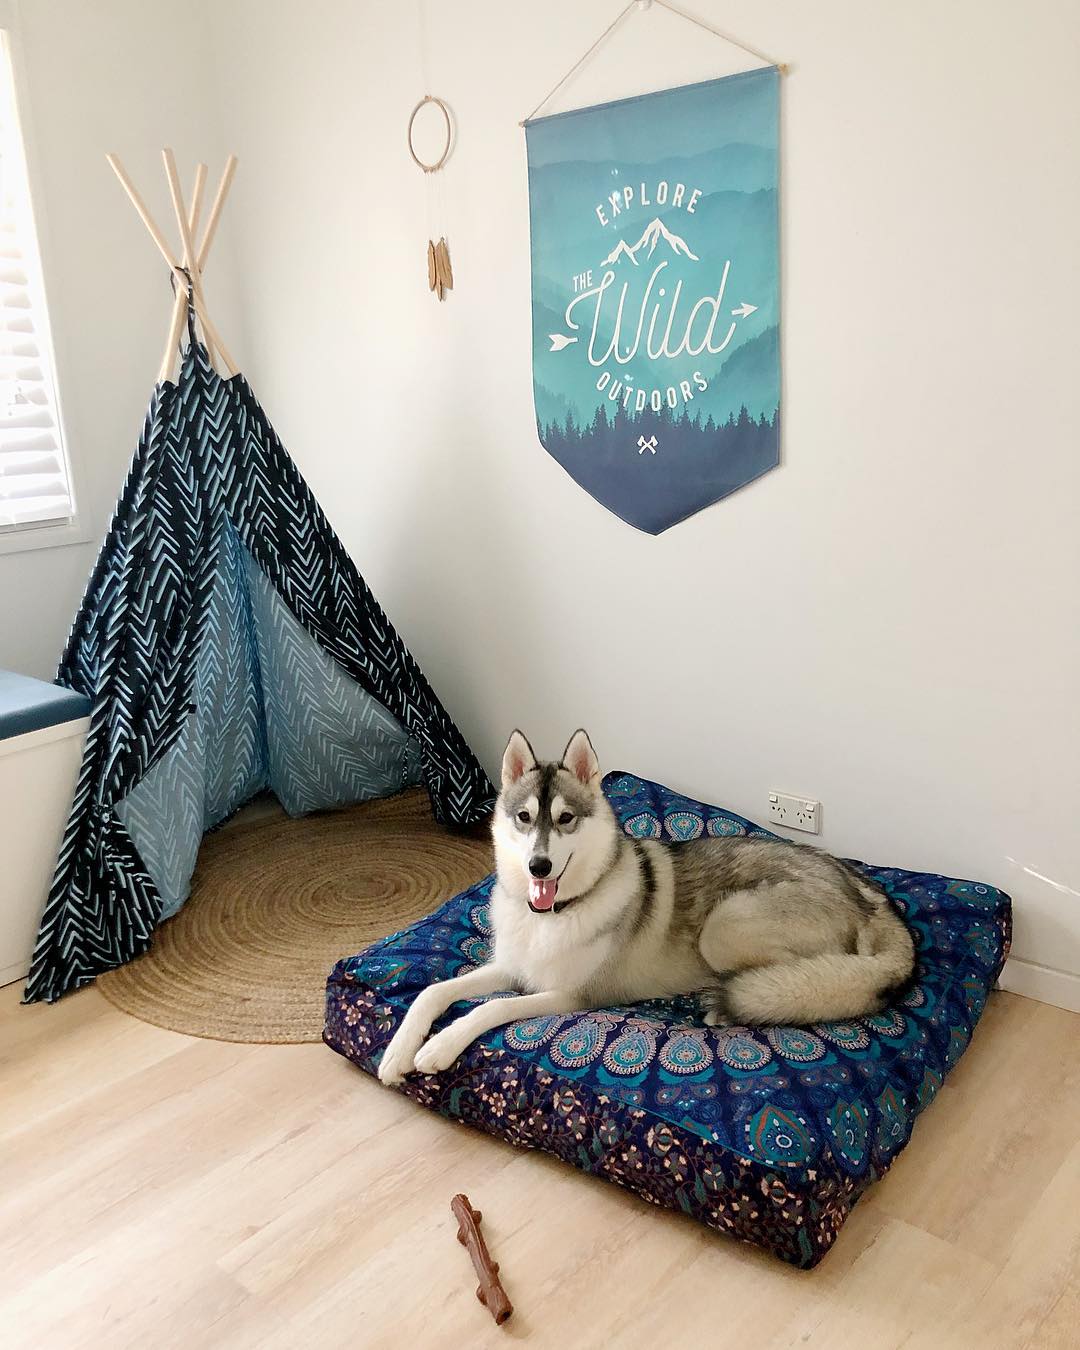 Dog Relaxing in Room with Tent and Bed. Photo by Instagram user @_life_of_nirvana_